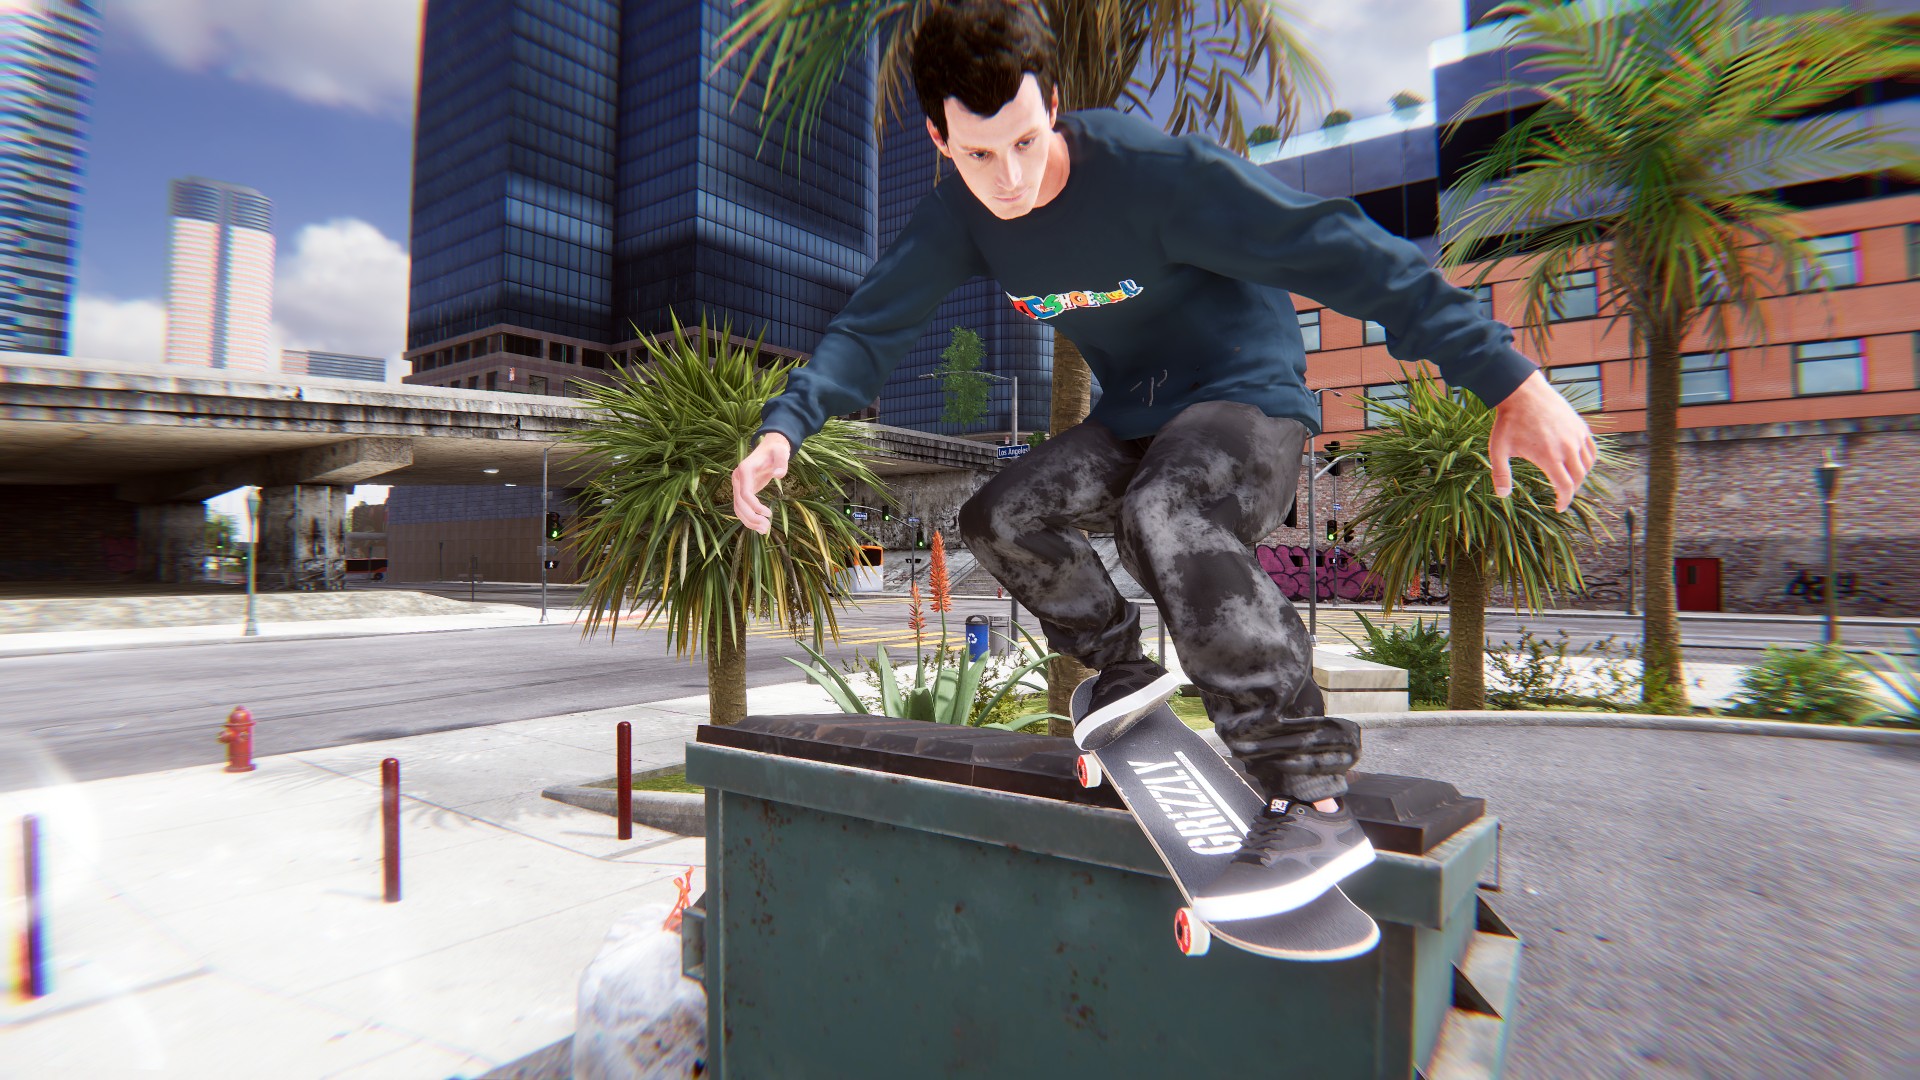 skate for xbox one